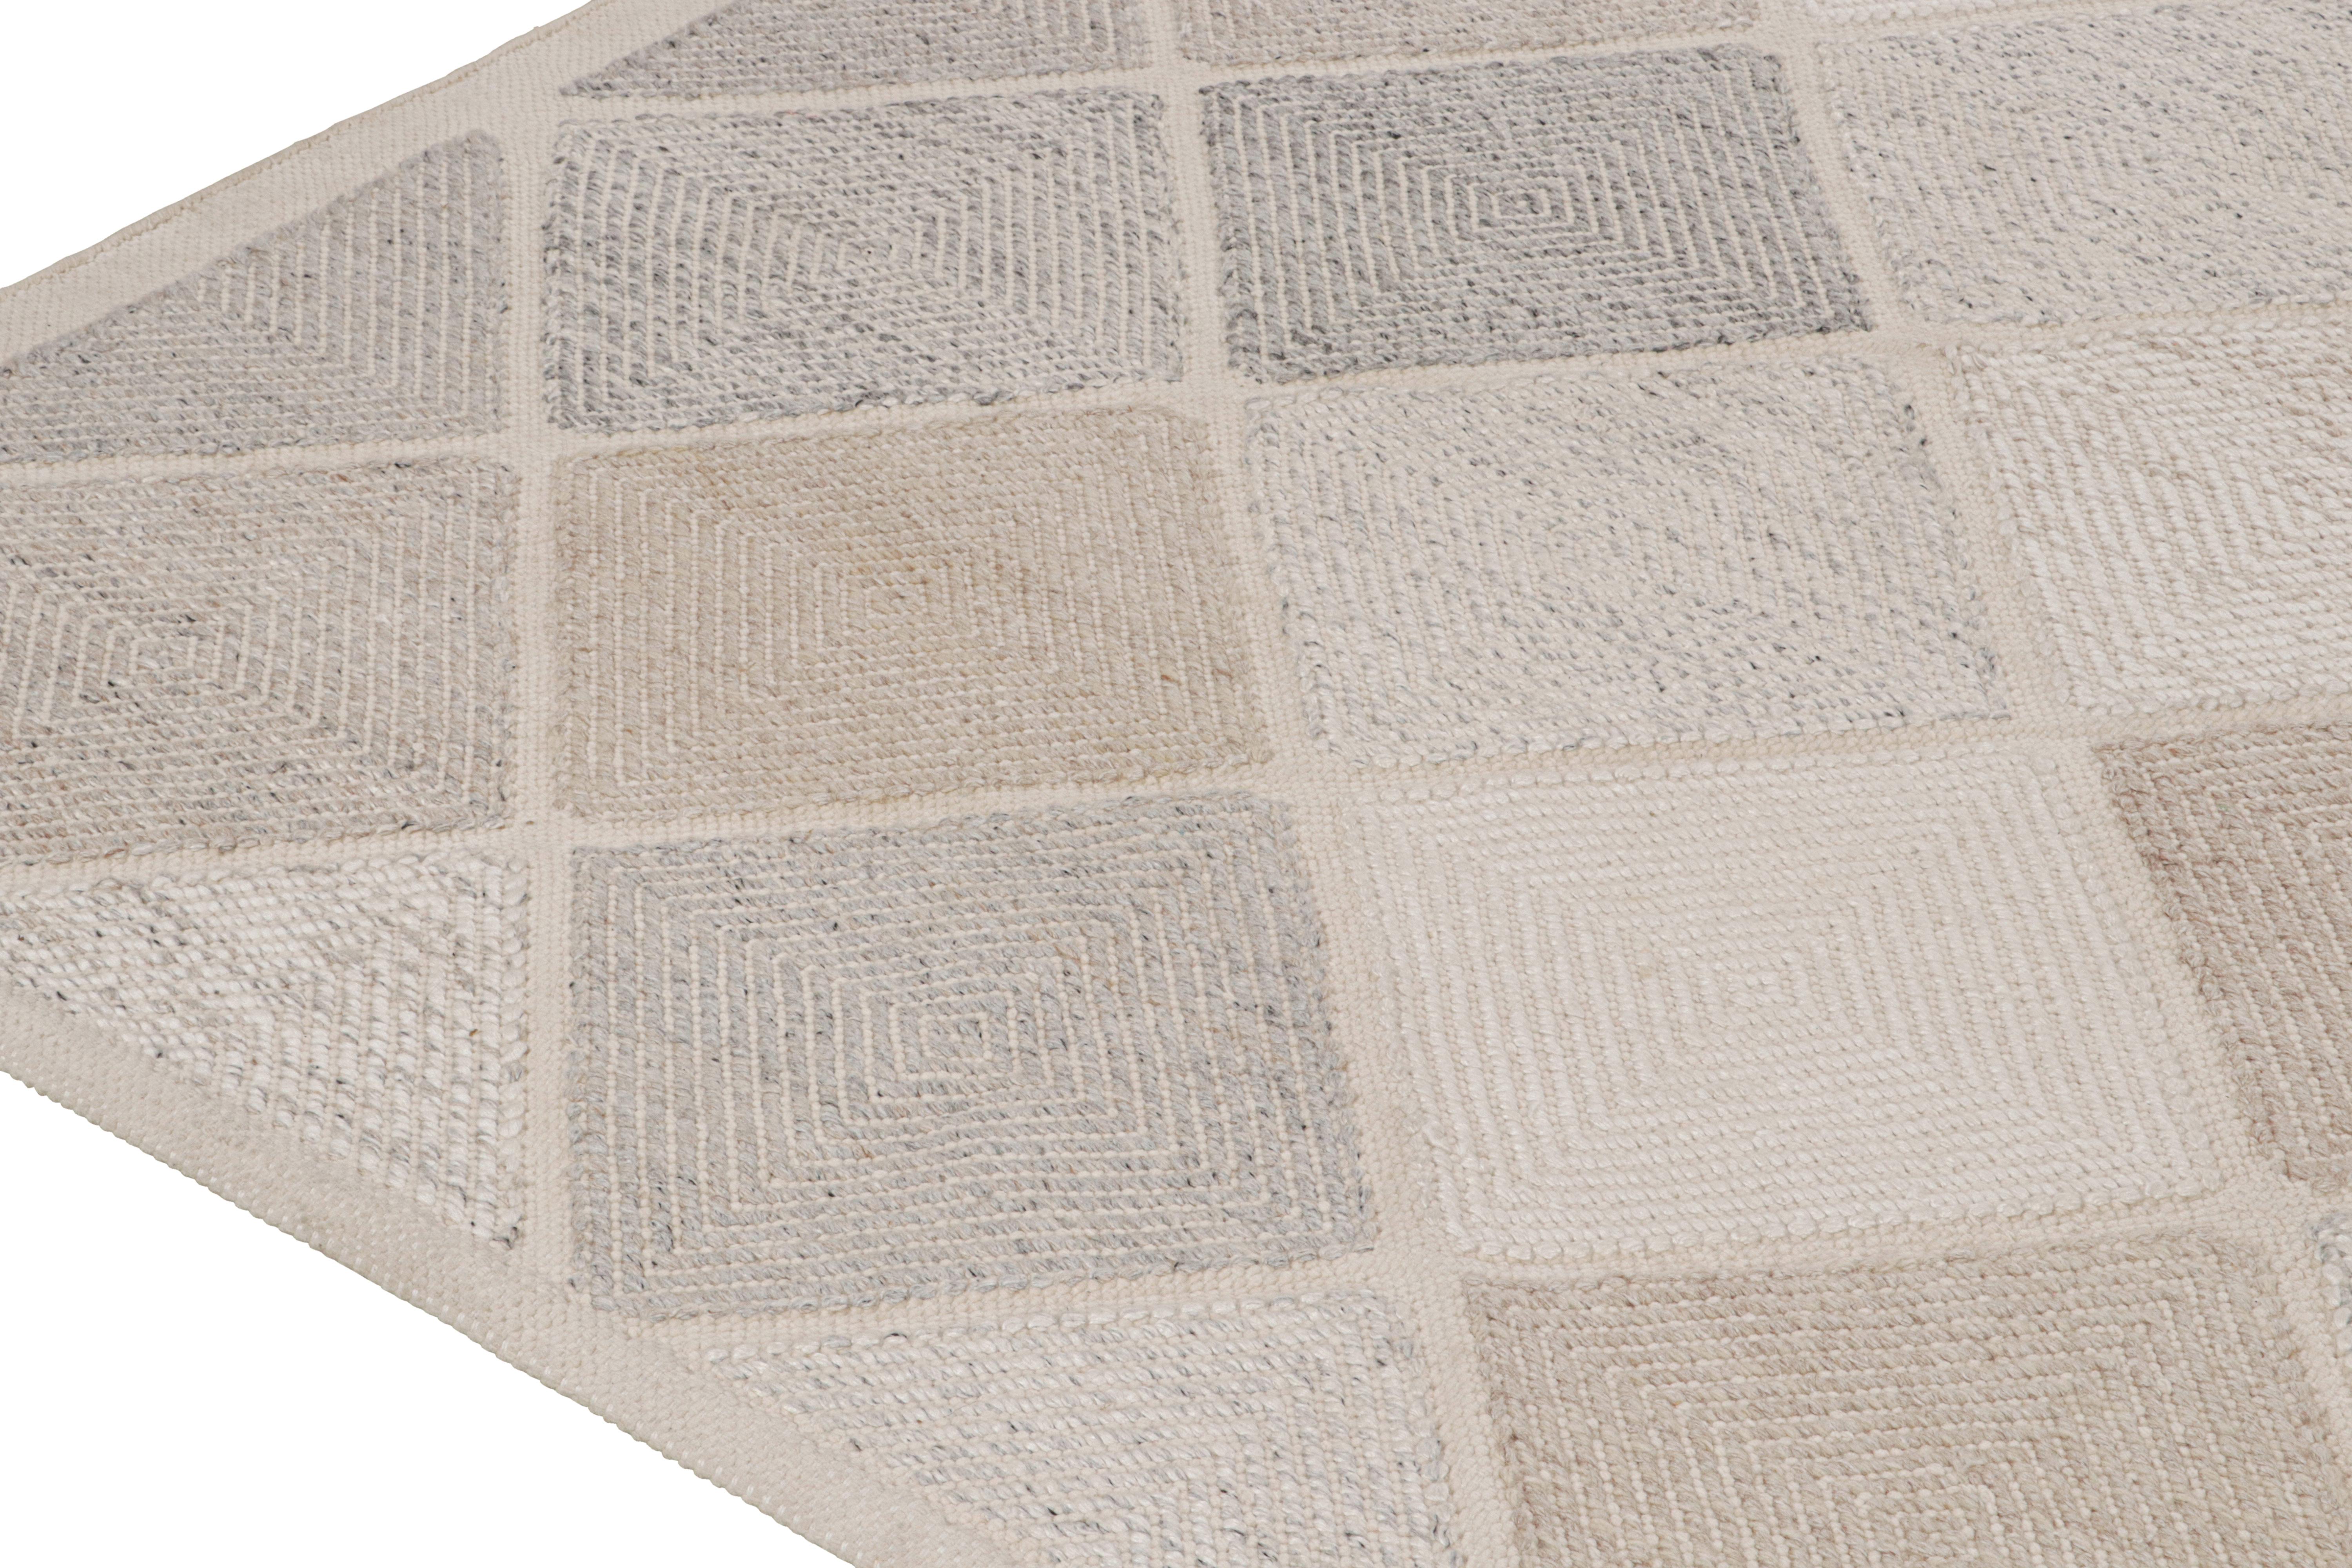 Indian Rug & Kilim’s Scandinavian Style Kilim in White, Taupe & Gray Diamond Patterns For Sale